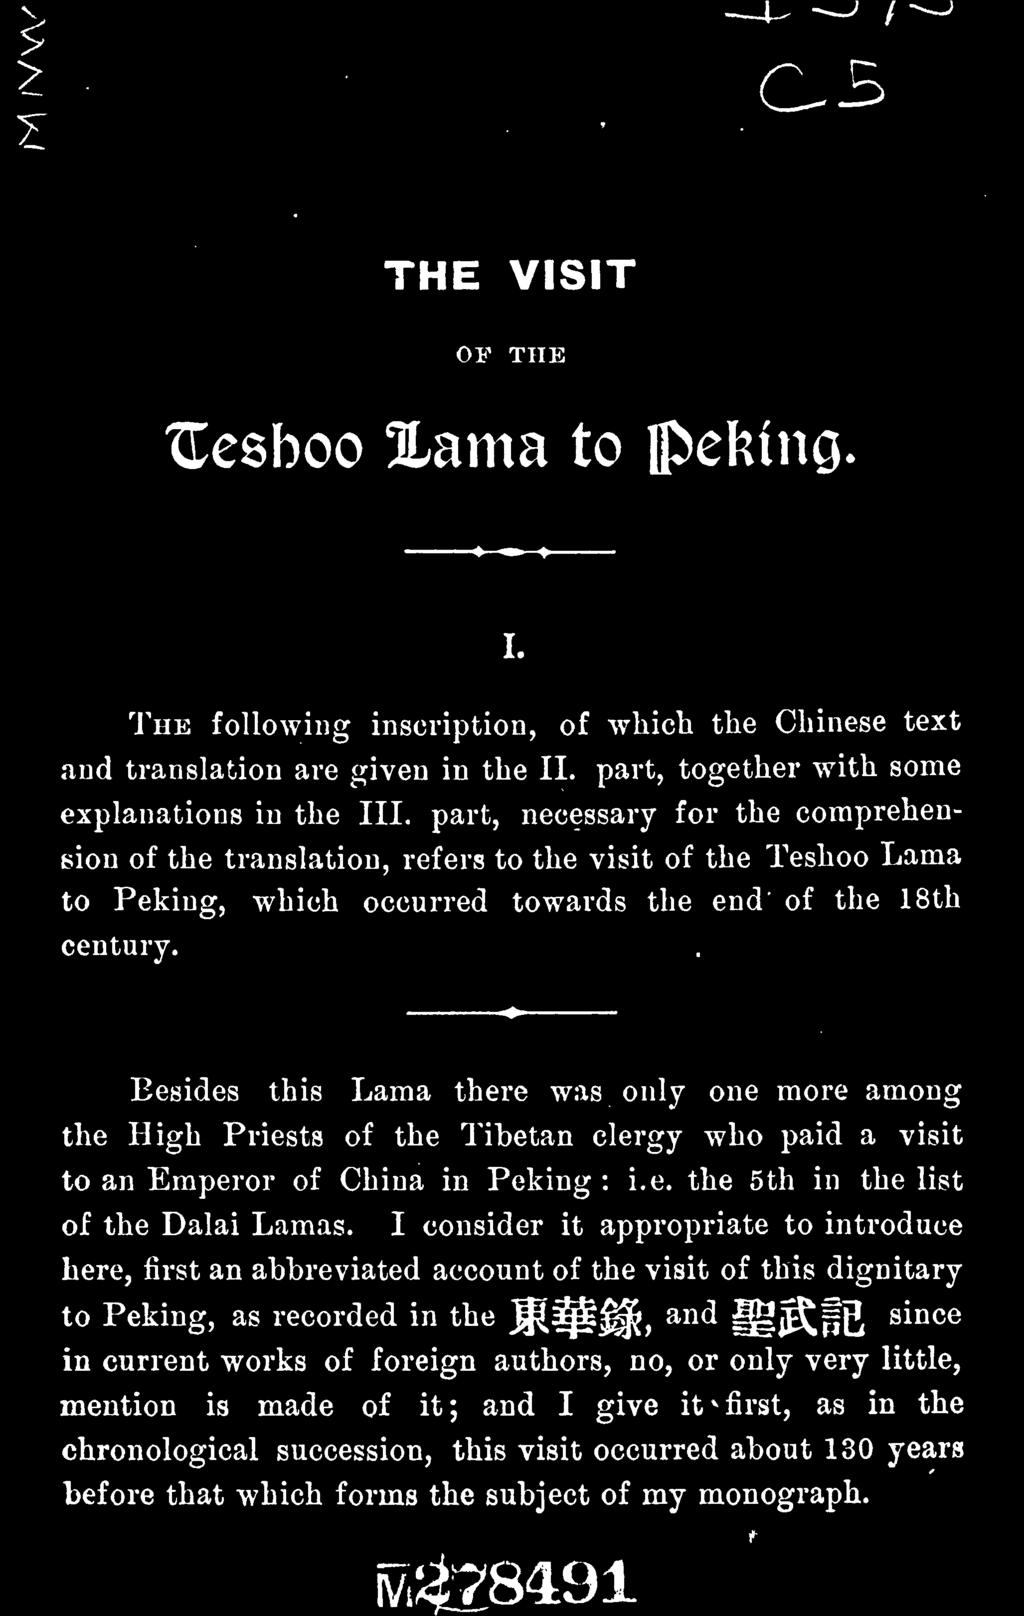 Emperor of China in : Peking i.e. the 5th in the list of the Dalai Lamas.